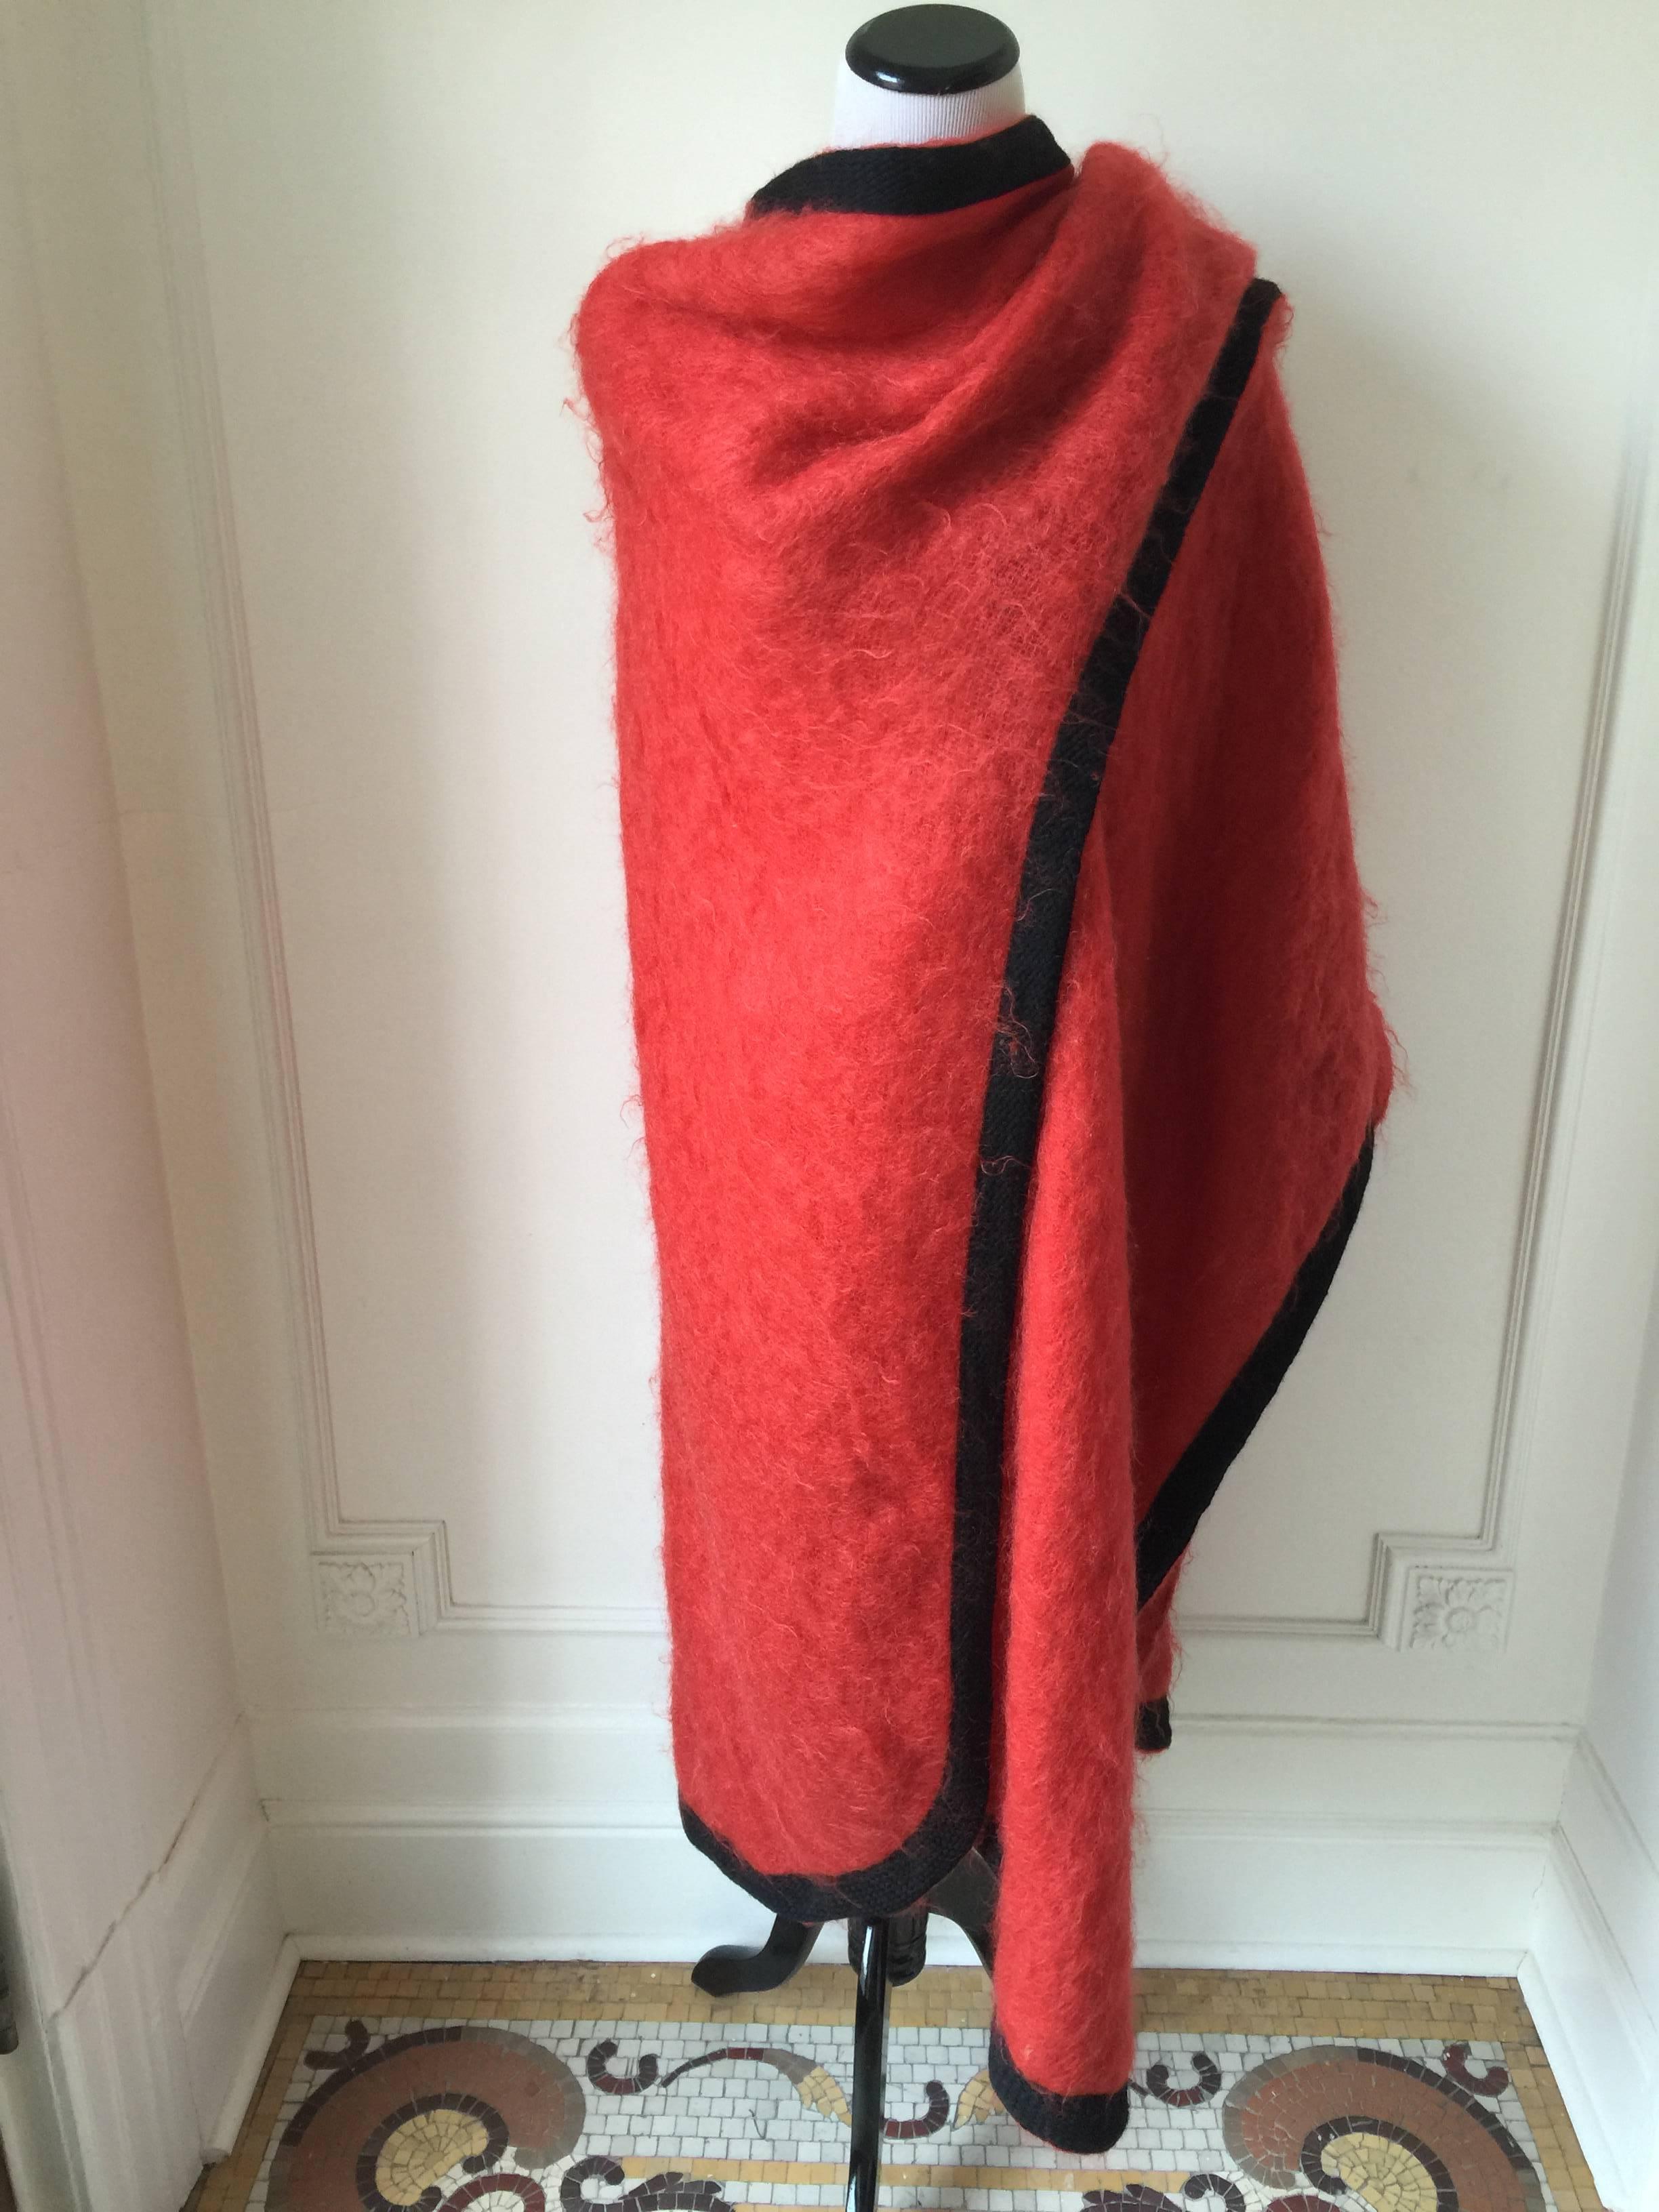 Stunning red opera cape, from the Russian Collection. 
Make an entrance.
Trimmed with intricate black trim..YSL signature red colour.